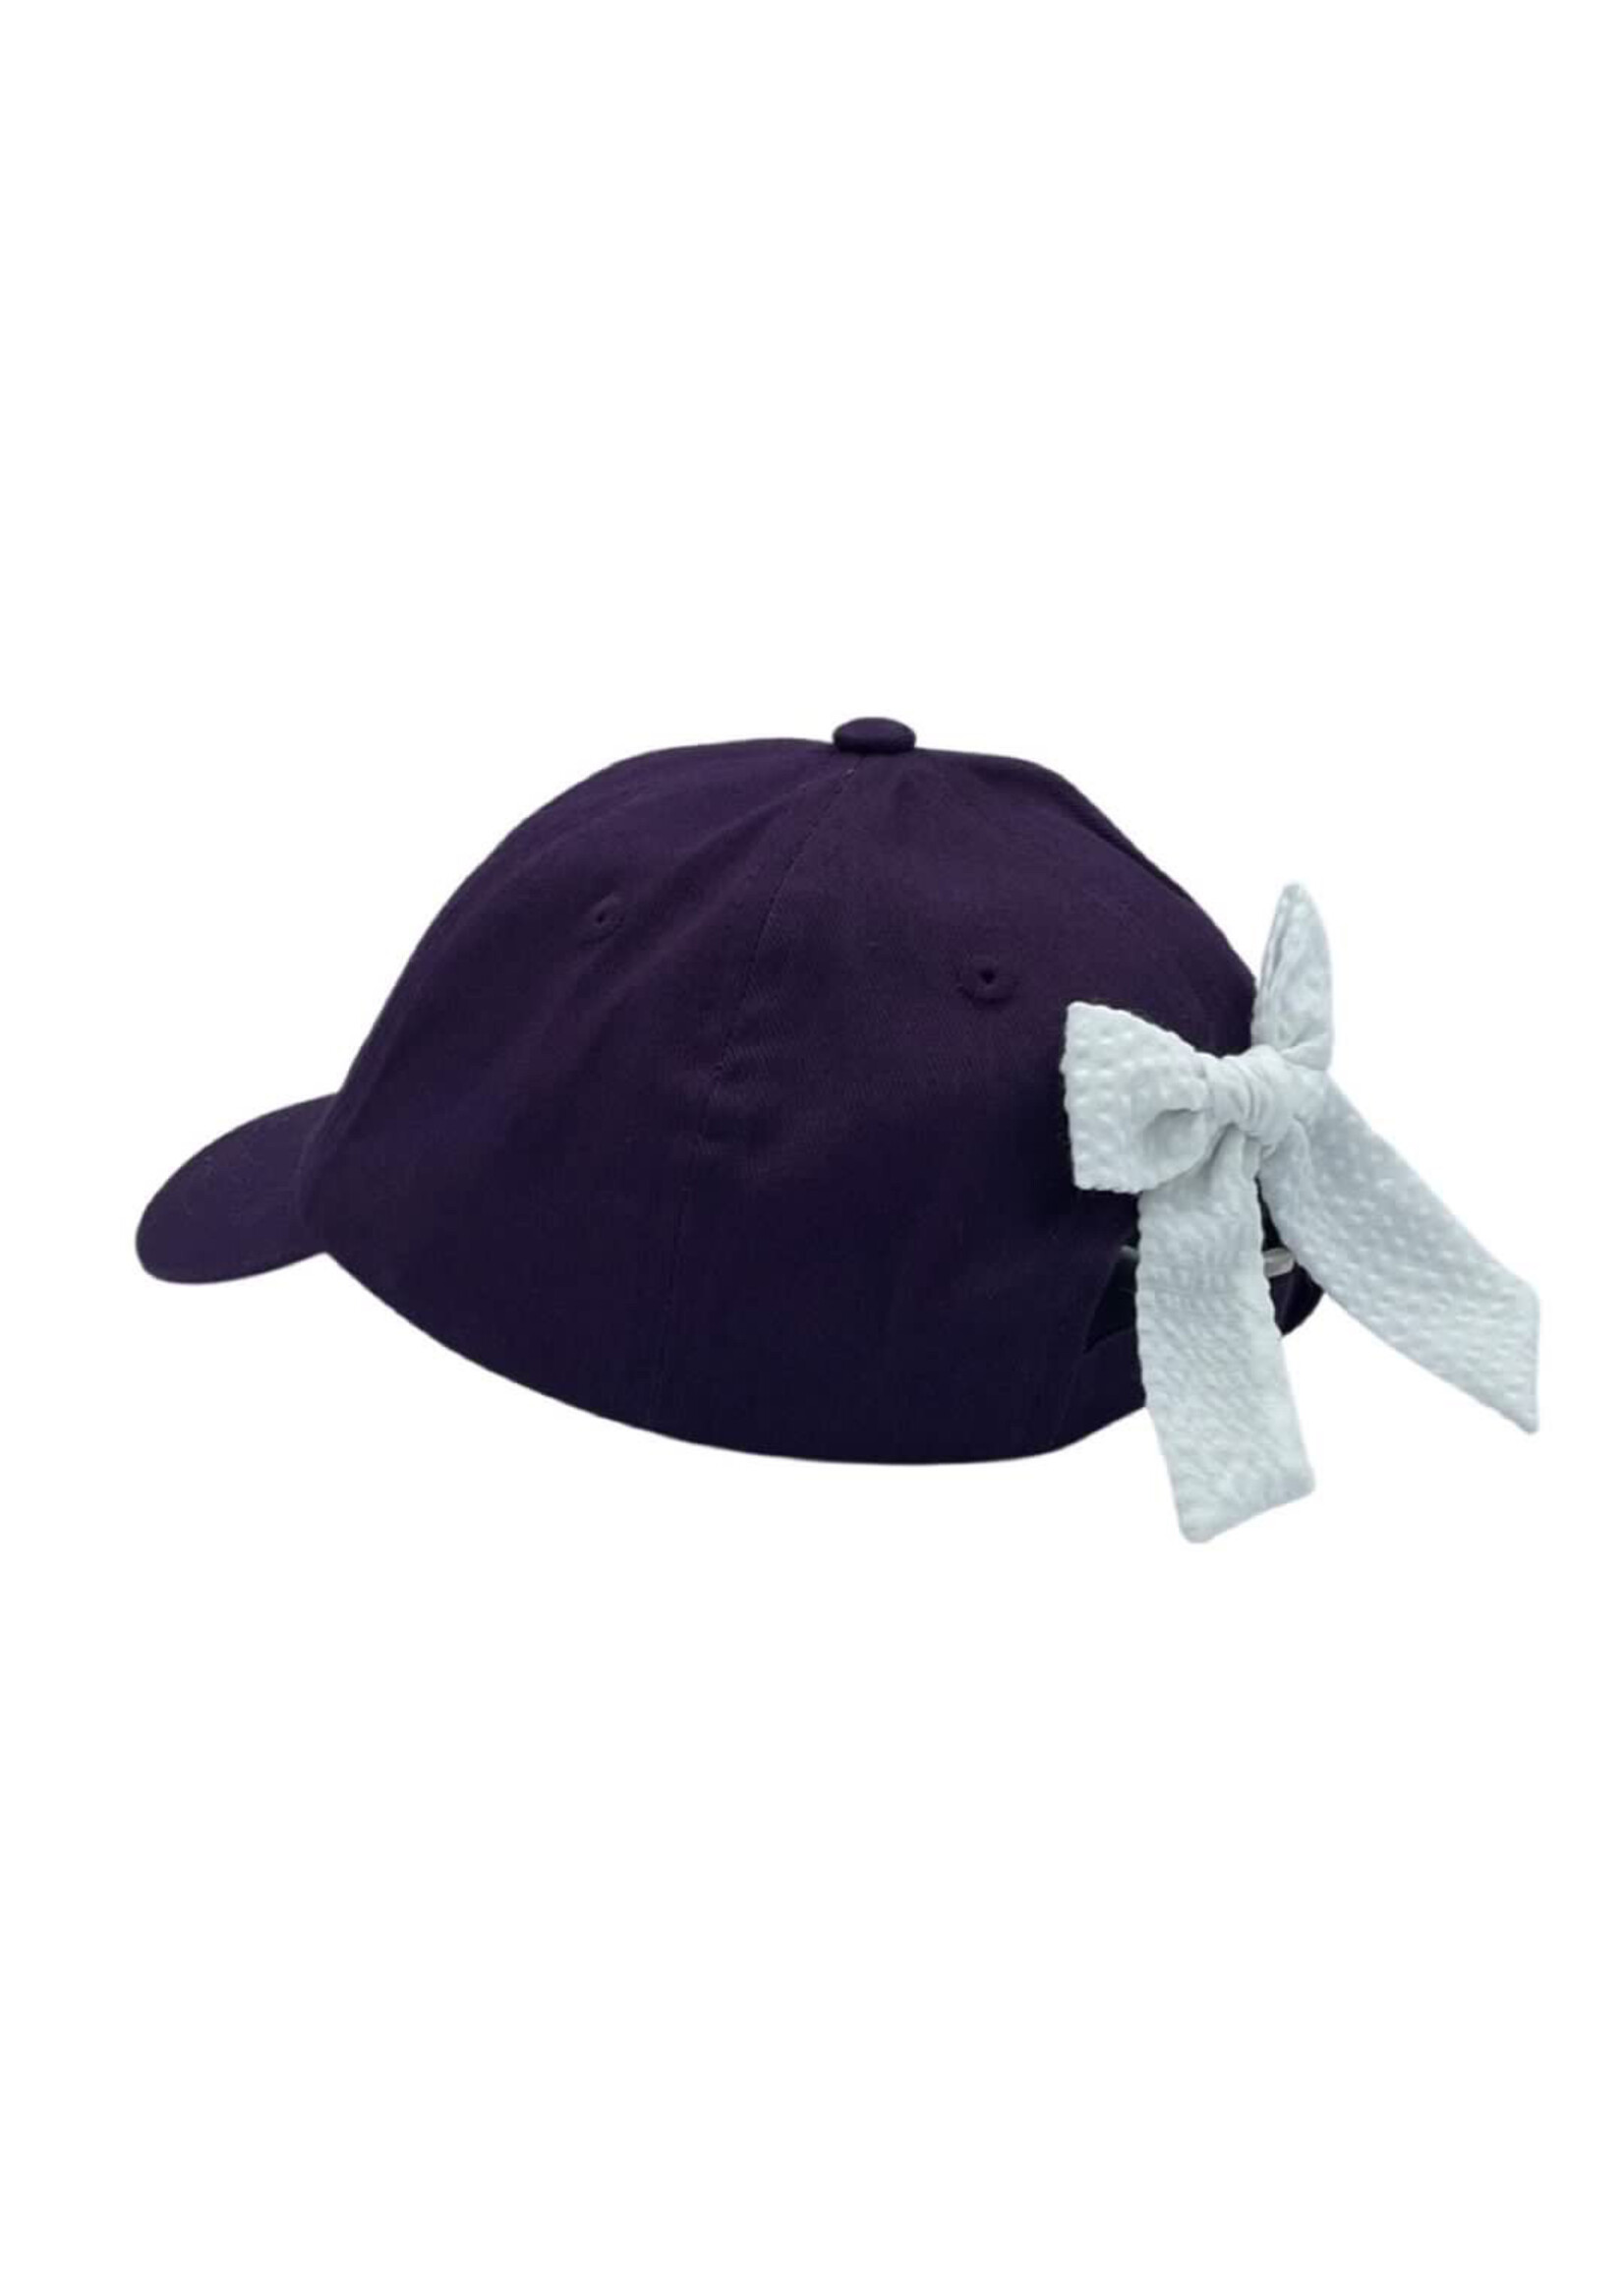 Bits & Bows Bits & Bows Girls Purple TX Hat -Purple with Bow